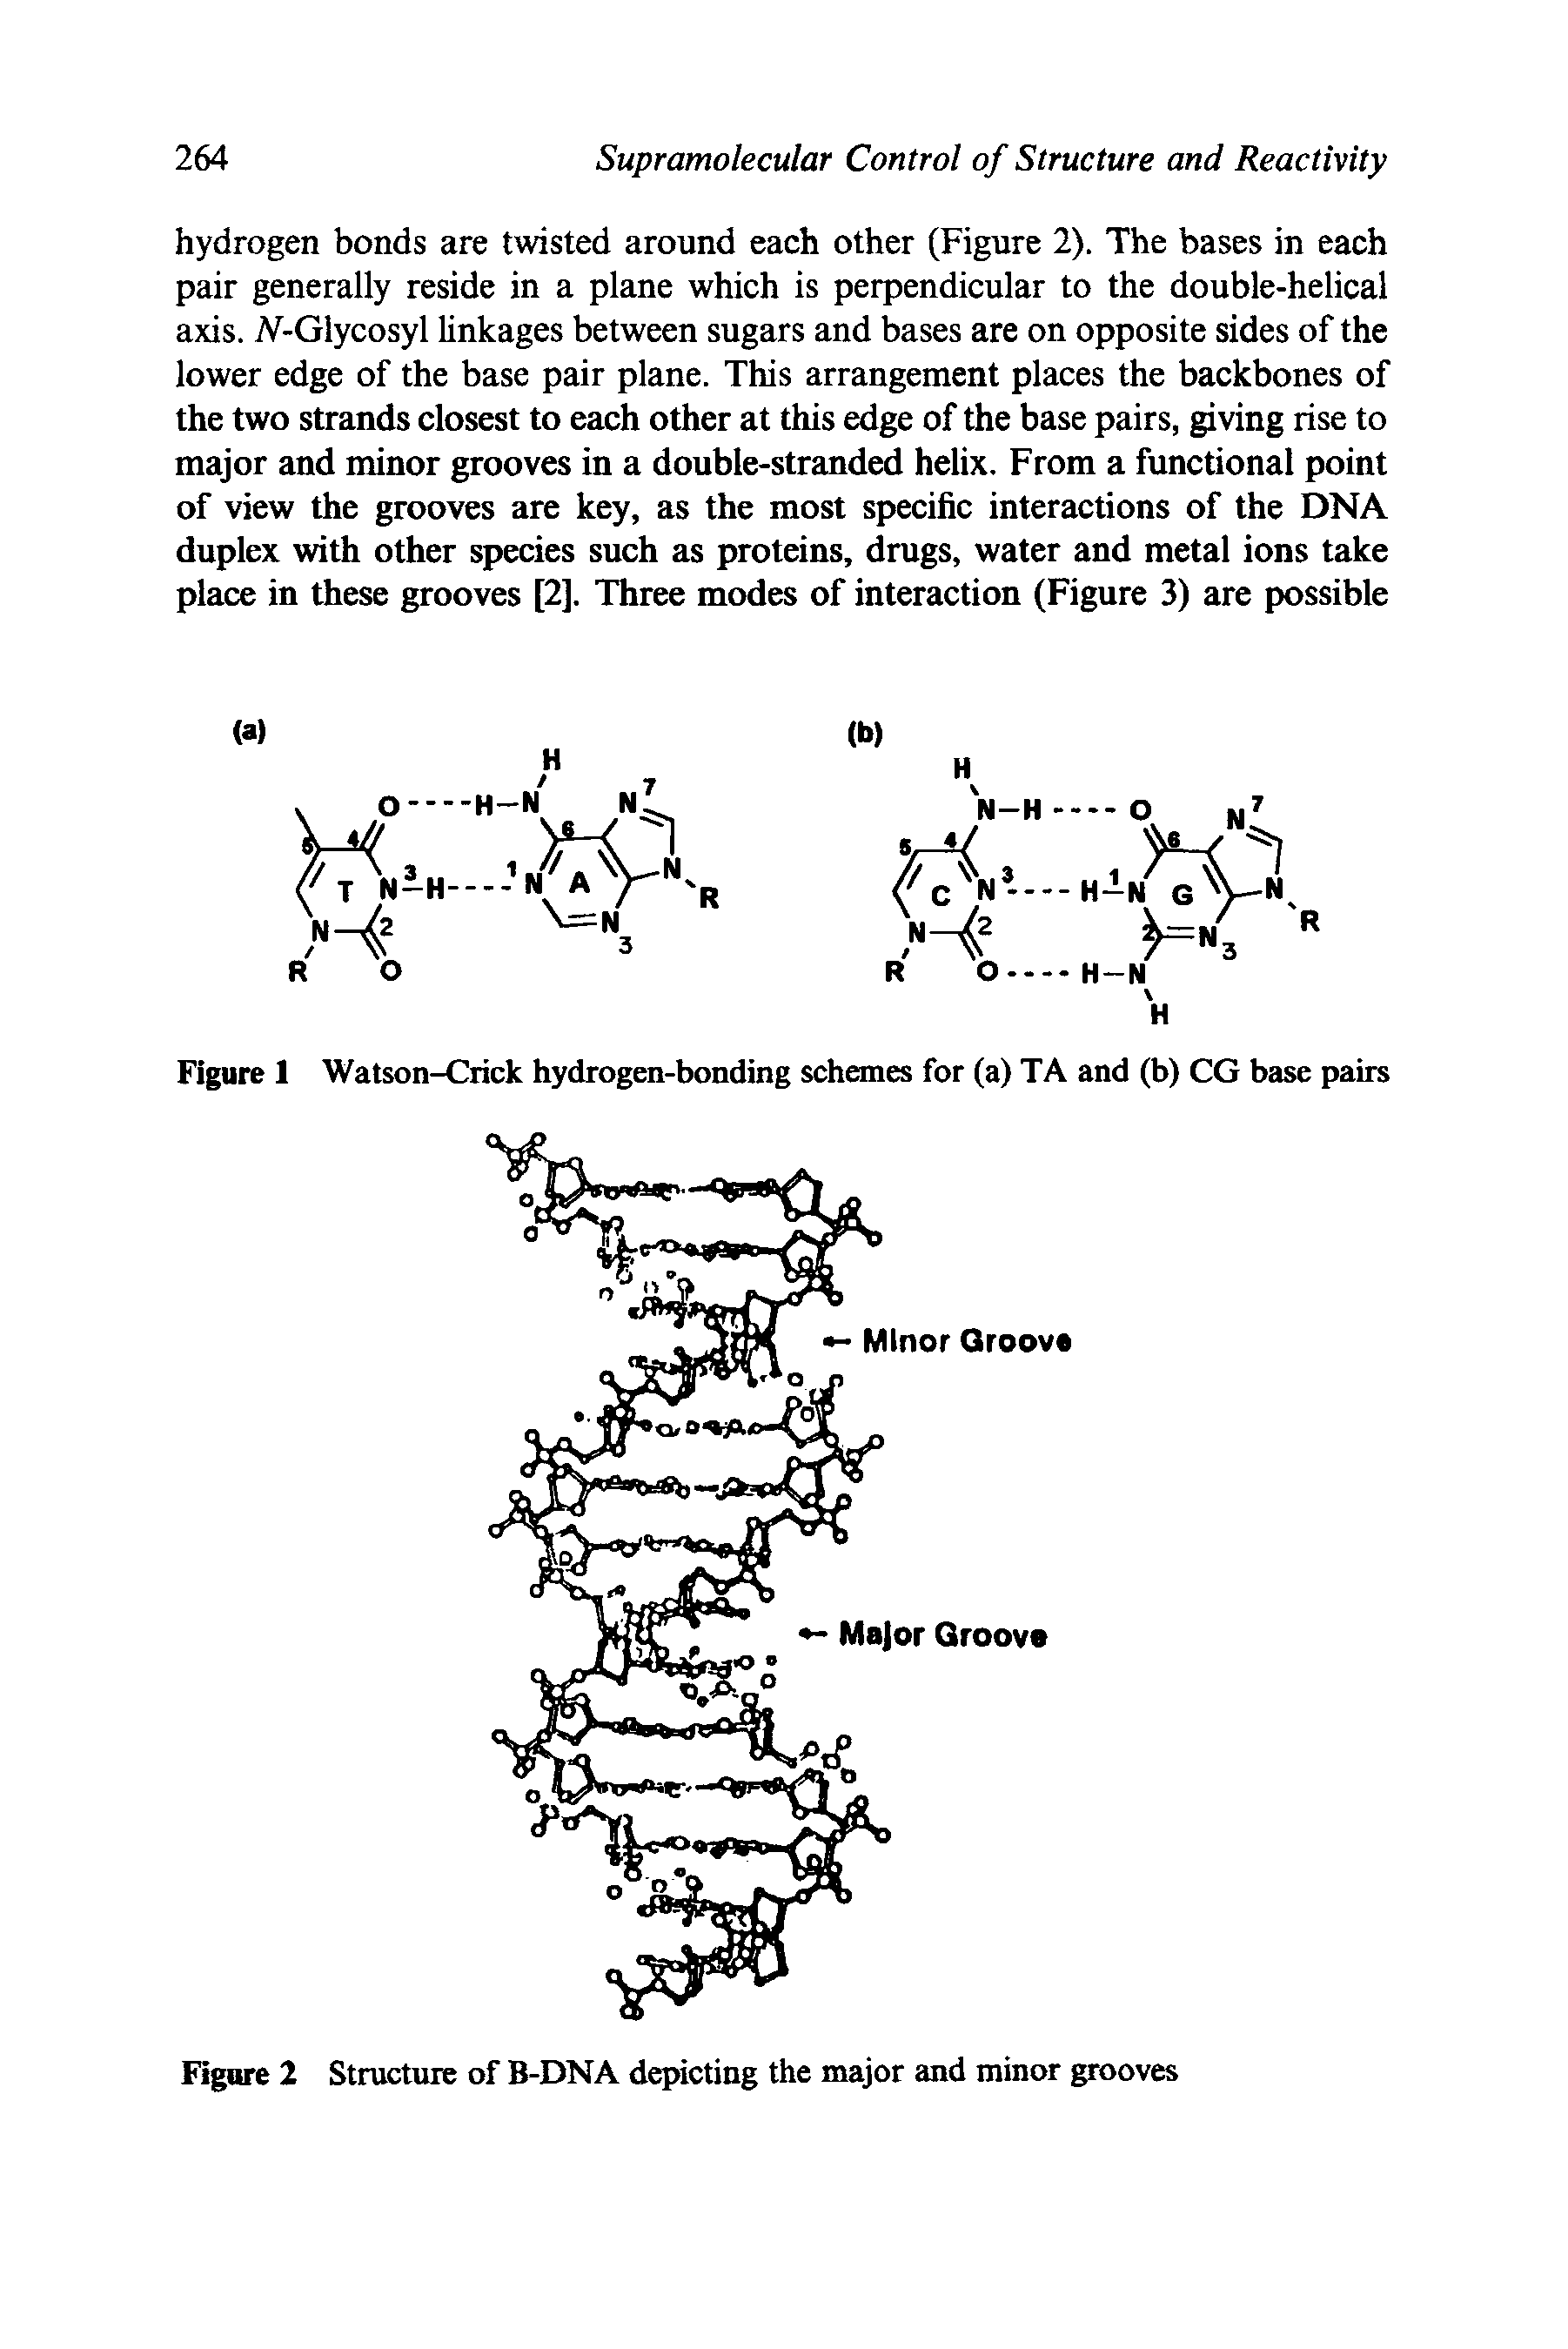 Figure 2 Structure of B-DNA depicting the major and minor grooves...